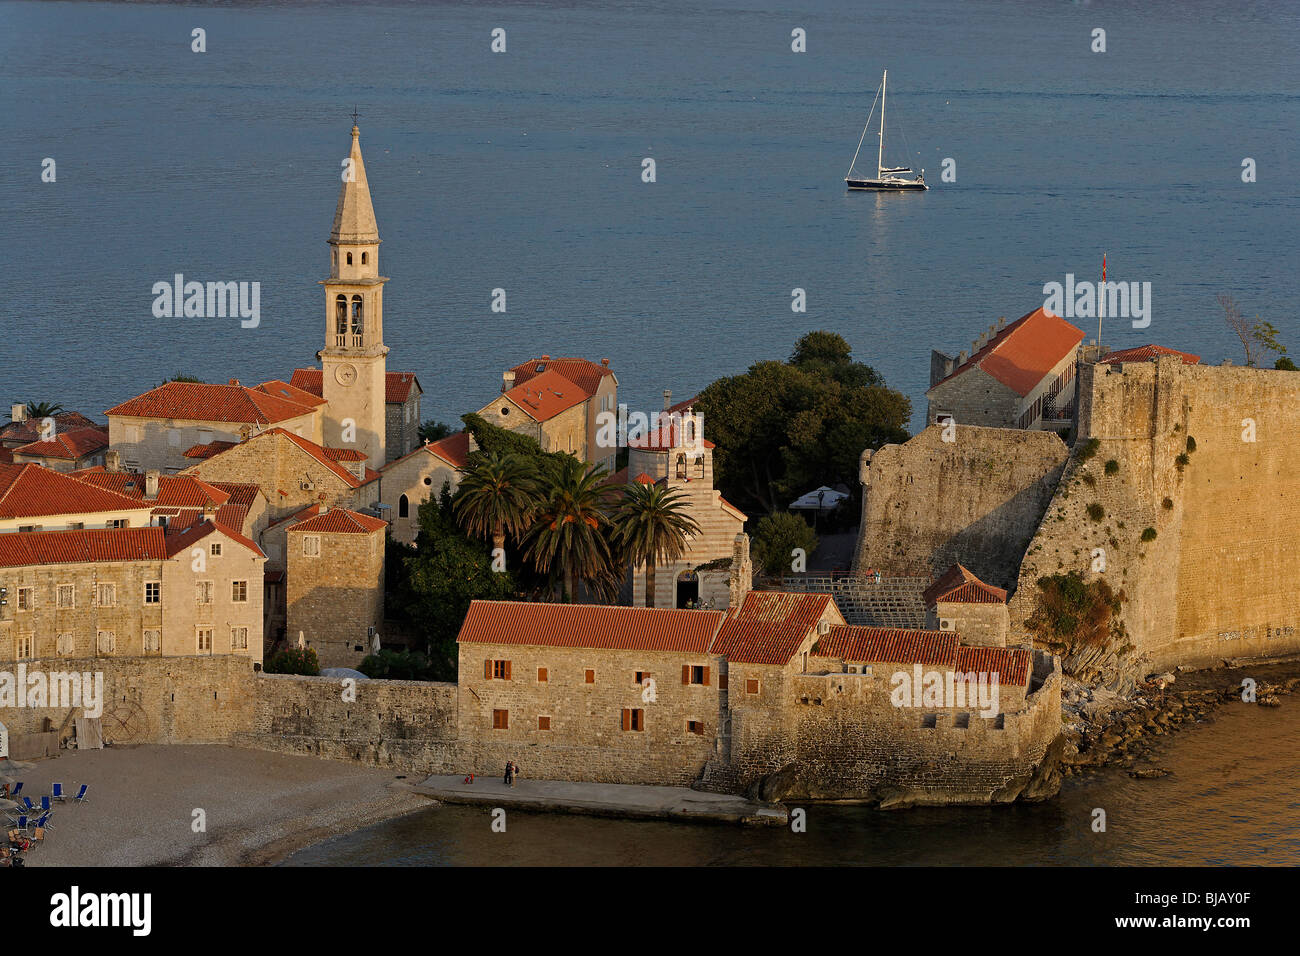 Budva,old town peninsula,Cathedral of St John,Bell tower,fortification walls,Adriatic coast,Montenegro Stock Photo